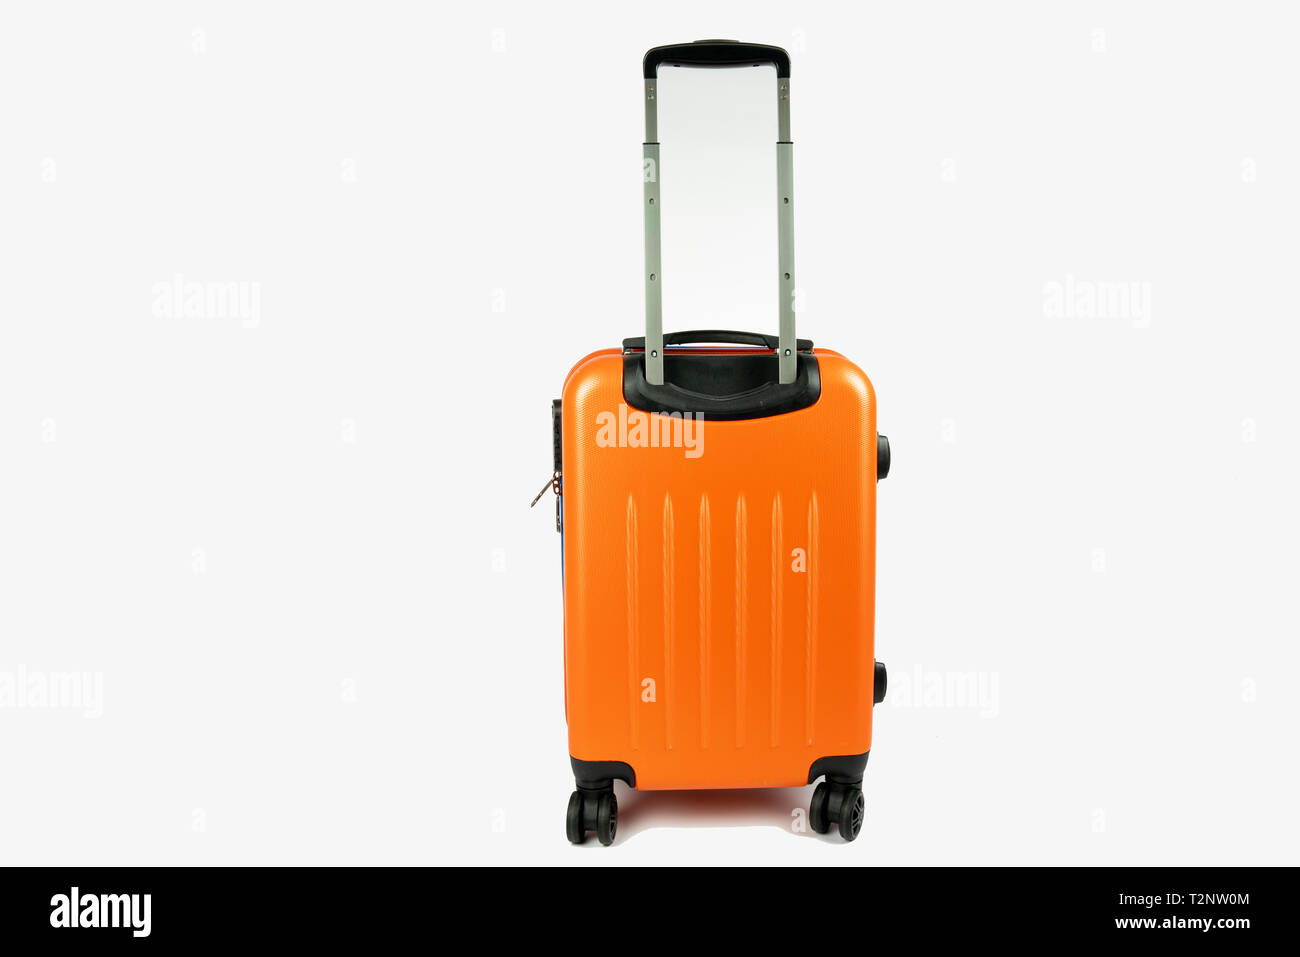 modern orange suitcase with the handle up. Ready to go for your vacation or business trip. The suitcase is on a white background with space next to it Stock Photo